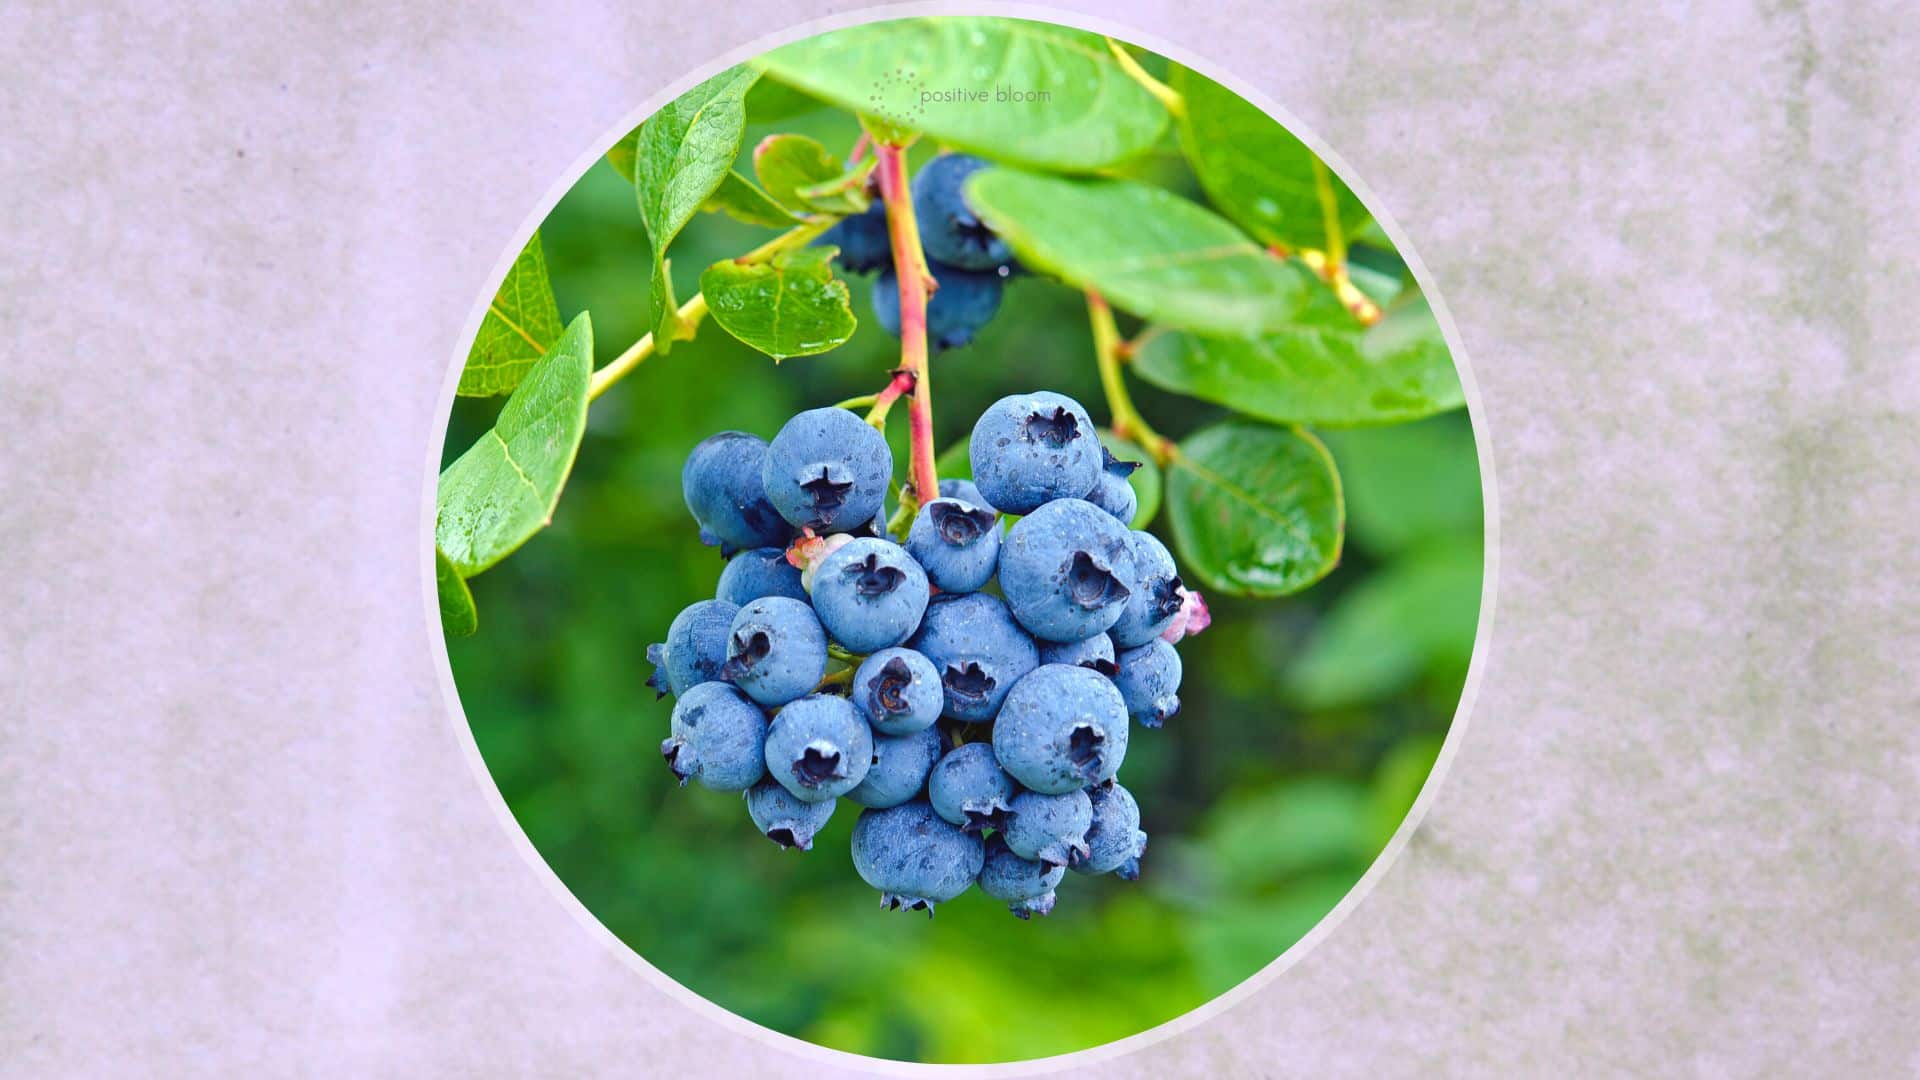 How To Grow Hydroponic Blueberries (Top Tips)